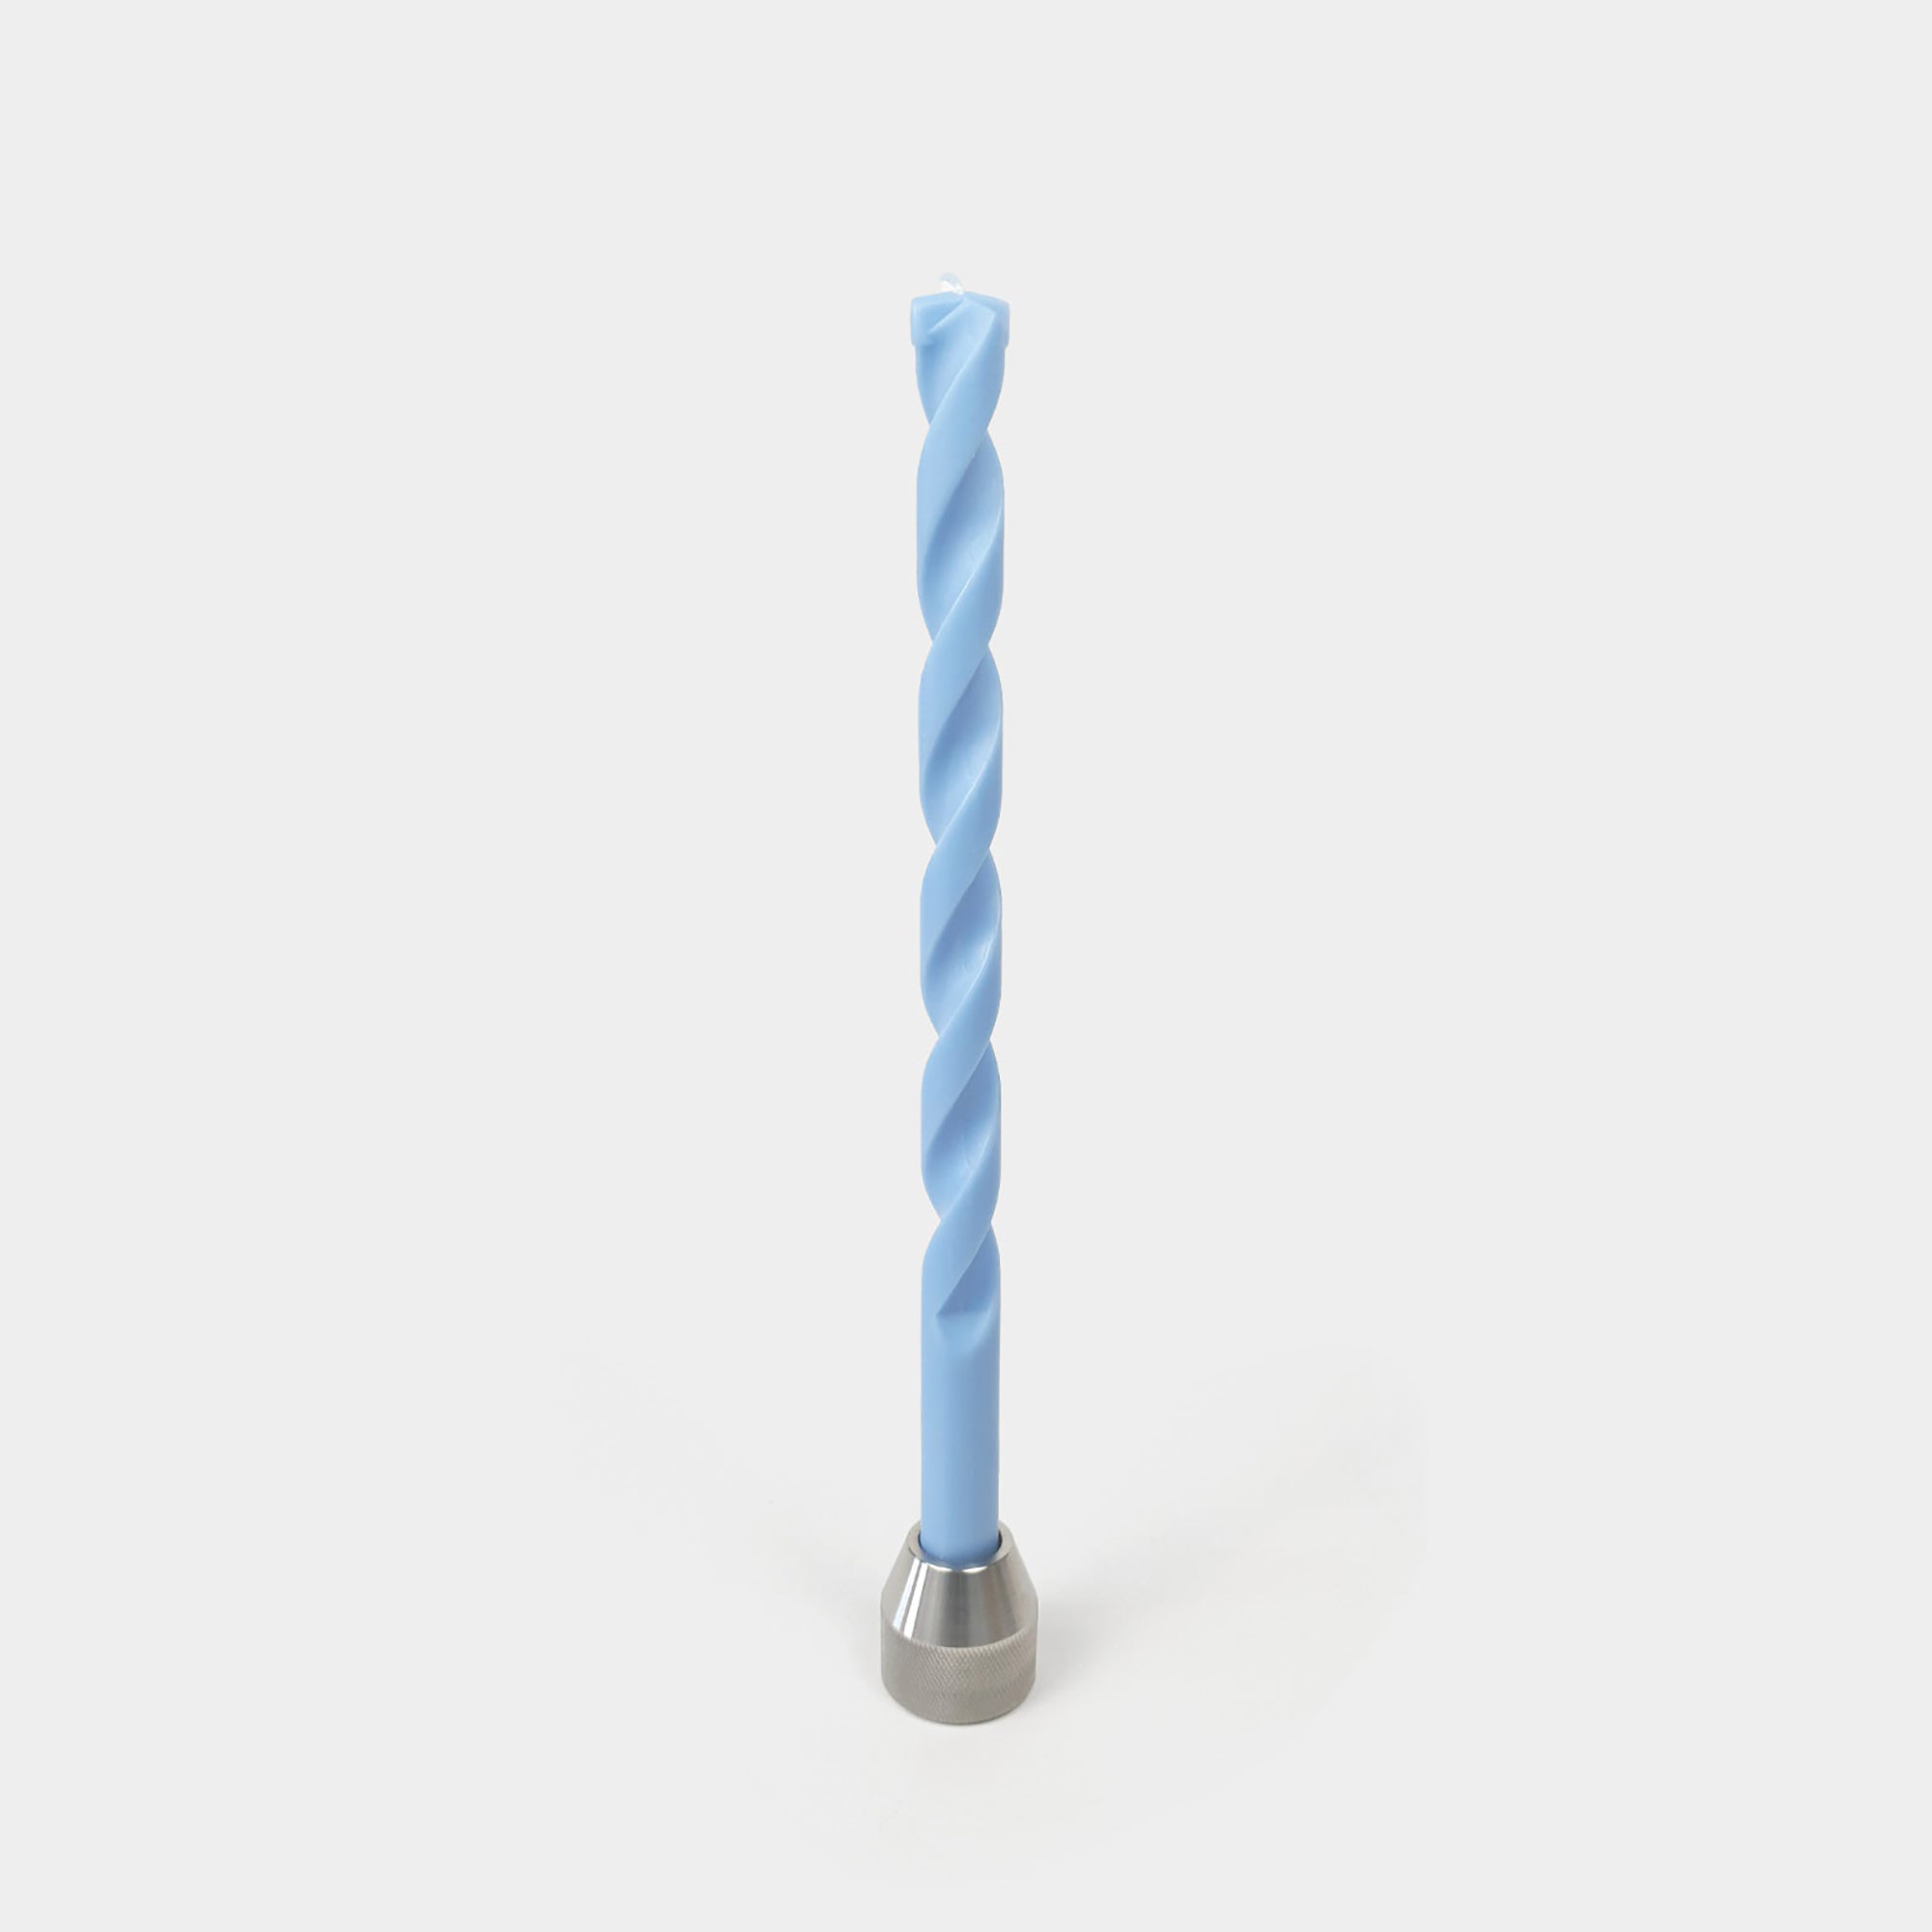 Drill Bit Candle Collection - Gessato